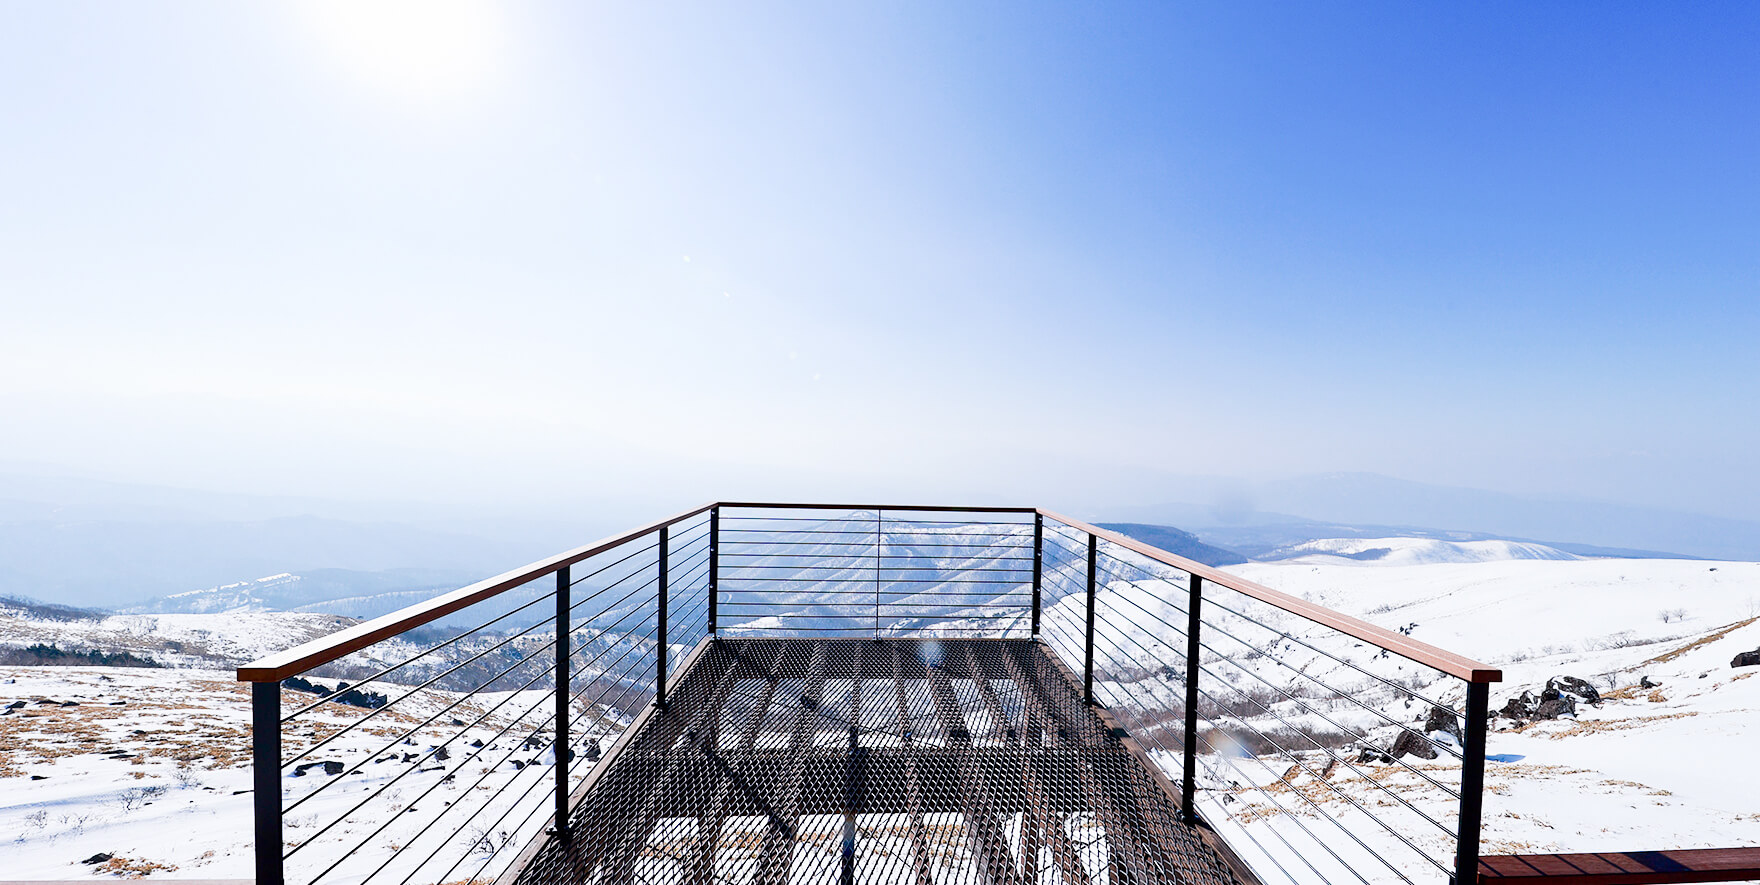 SKY TERRACE, a spectacular observation deck at the top of the mountain